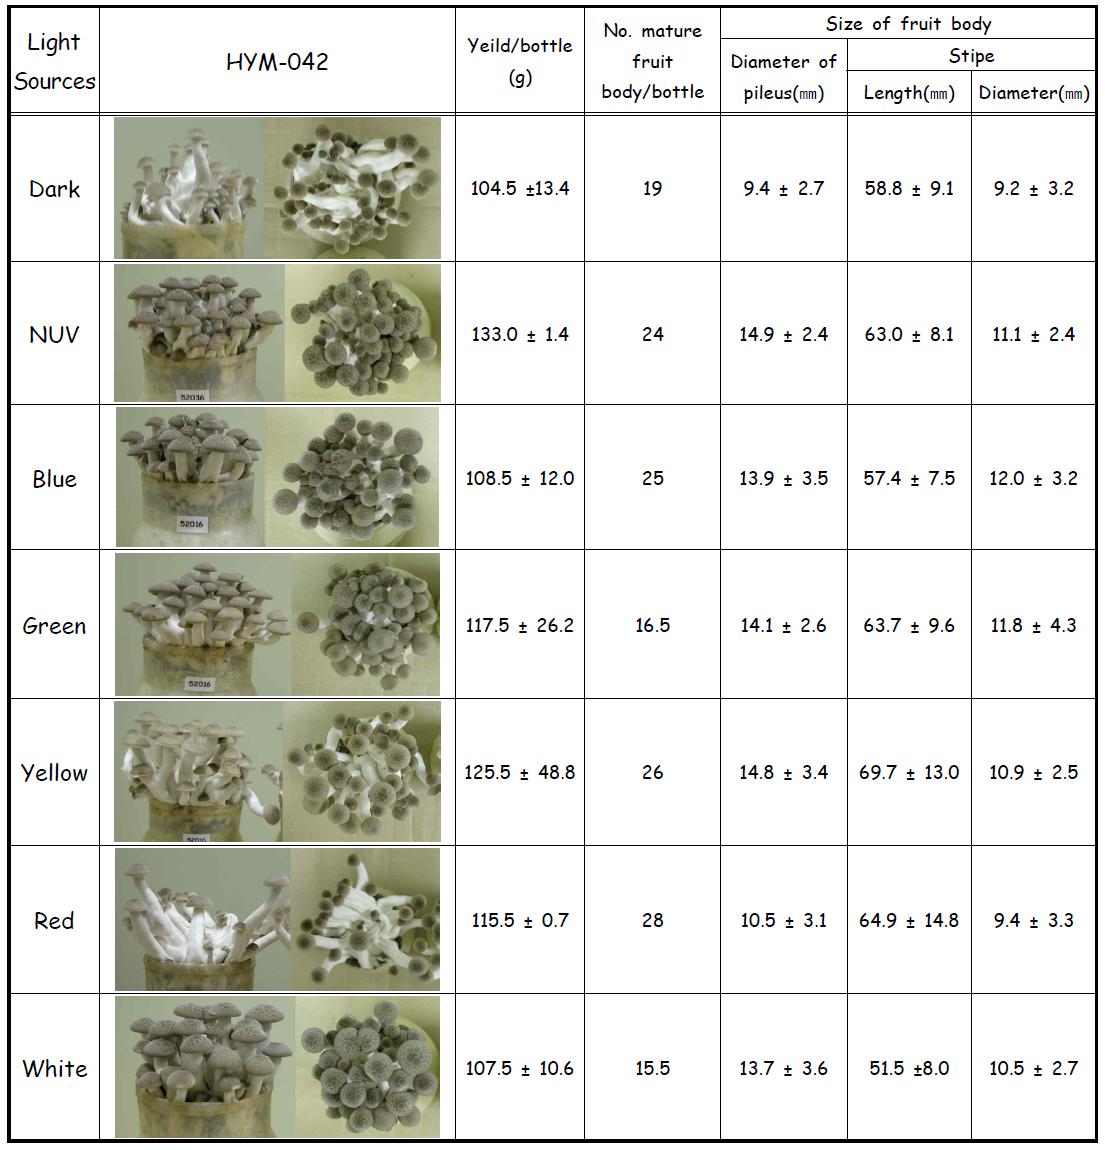 Characteristics and yield of H . marmoreus isoalte HYM-042 fruit bodies grown under the various light sources